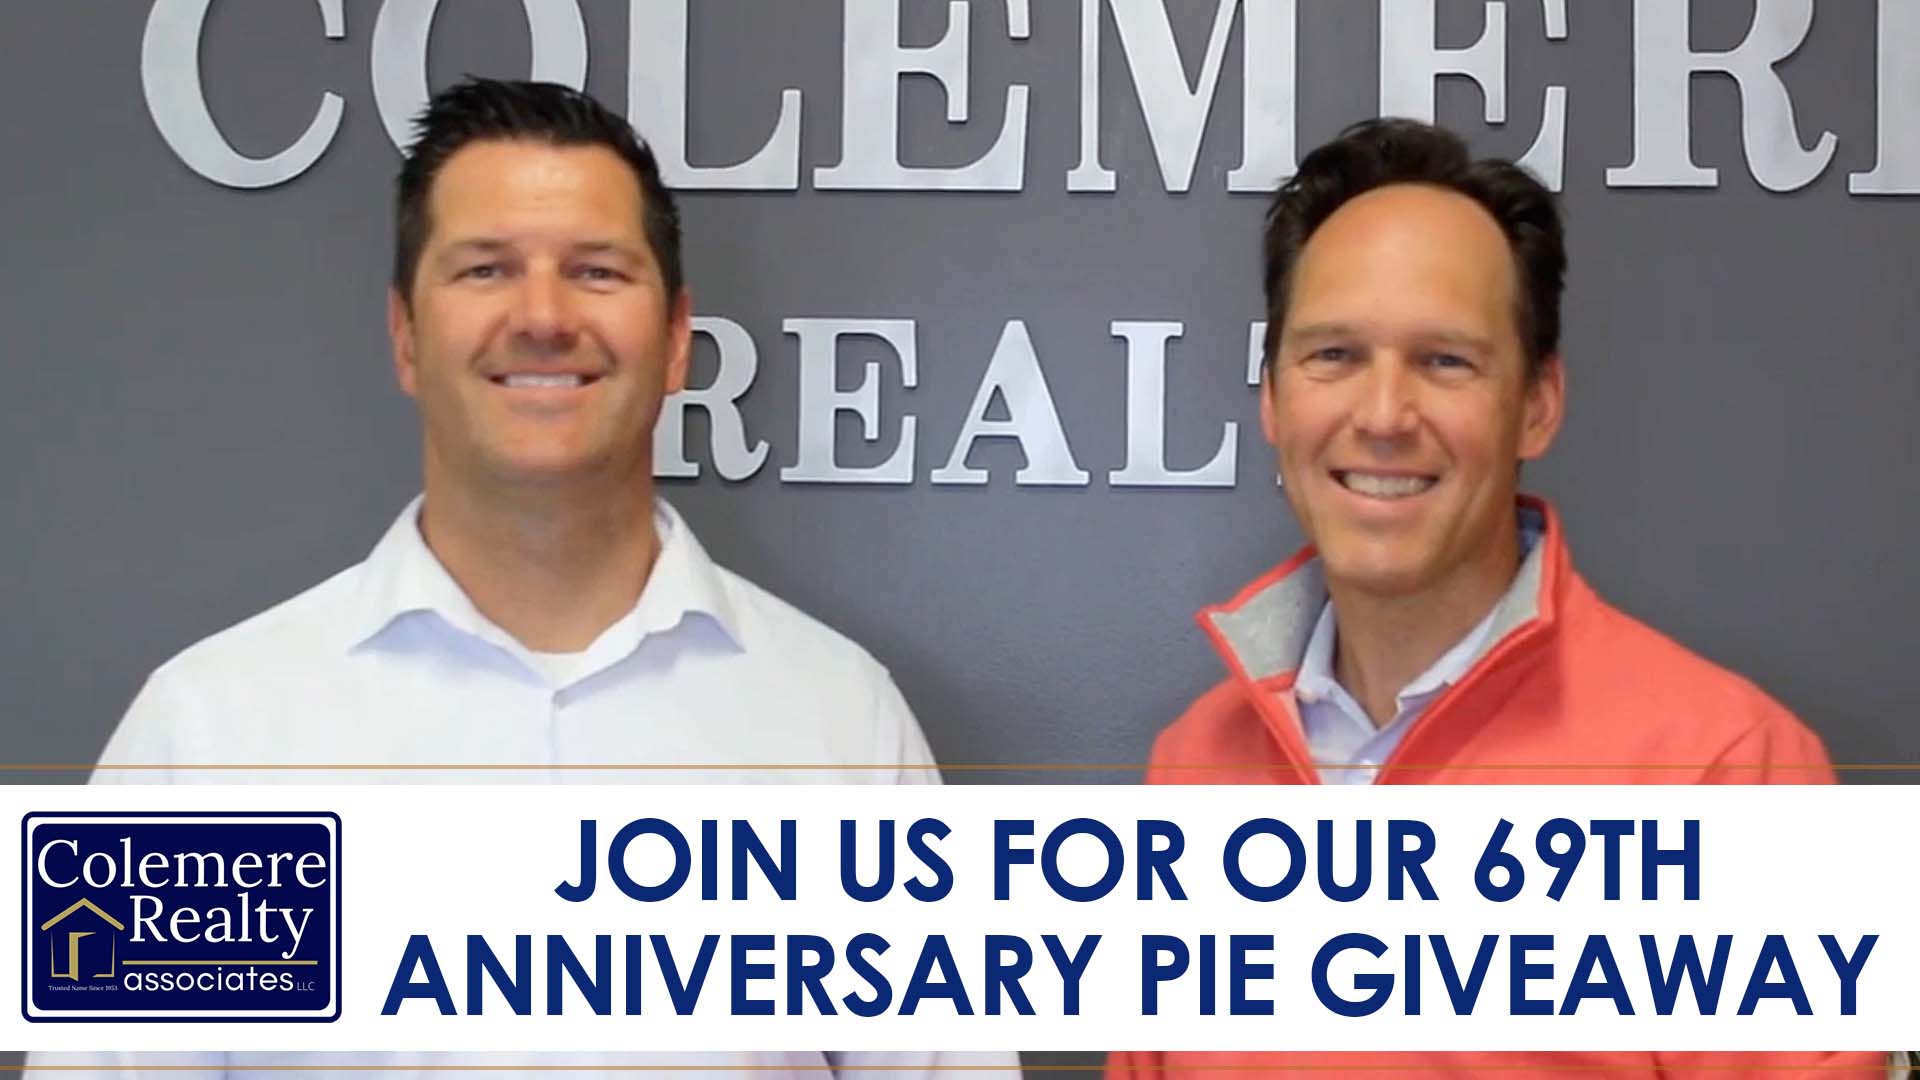 Celebrate Our 69th Anniversary With Some Pie